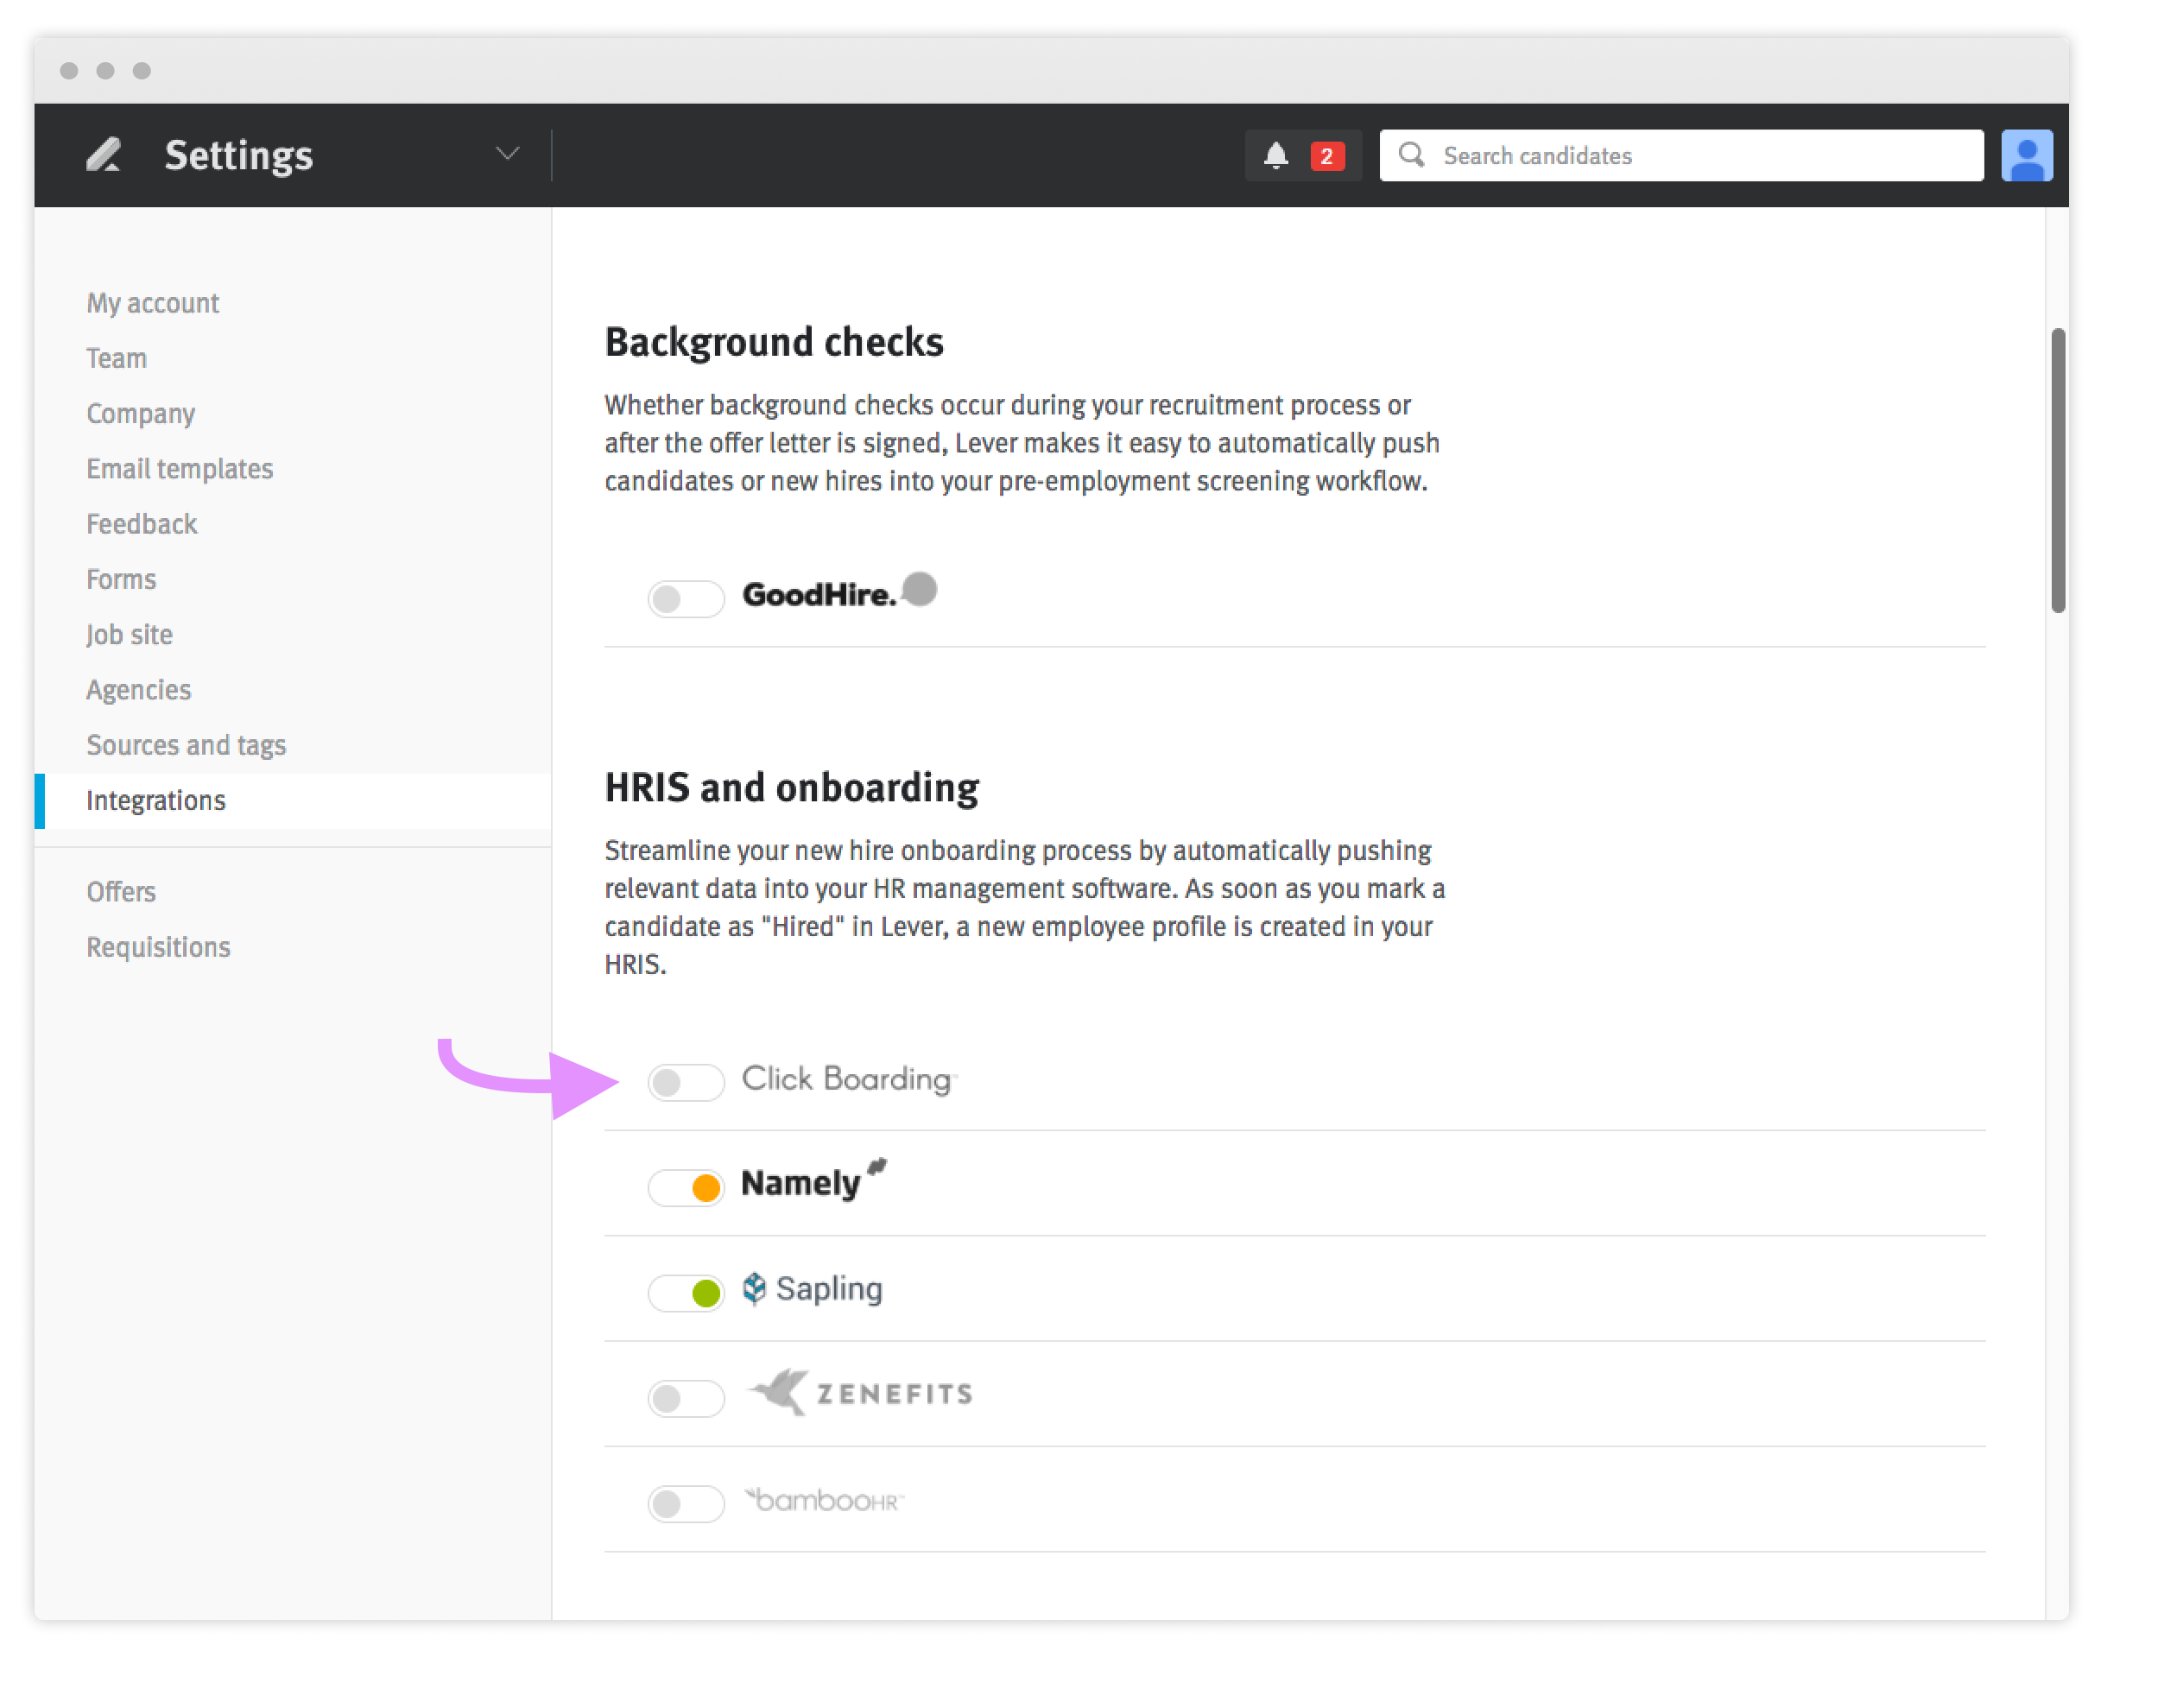 Lever integrations settings page with arrow pointing to click boarding toggle in the HRIS and onboarding section